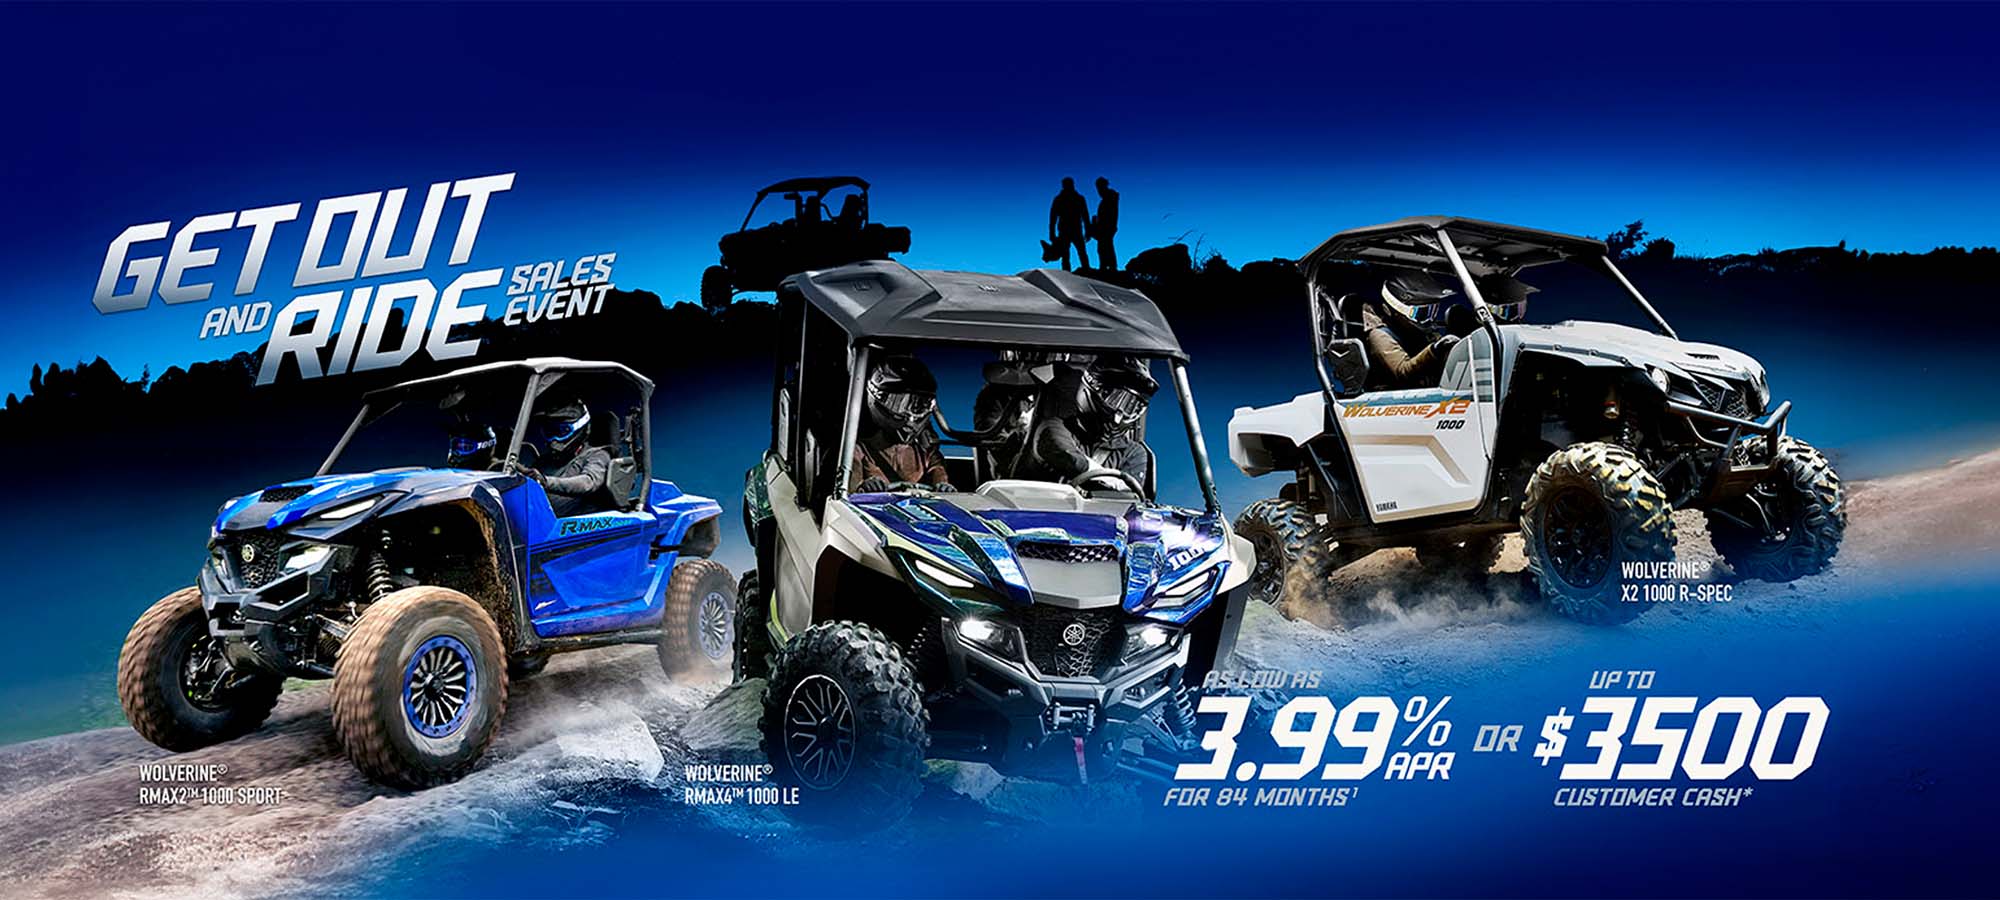 Yamaha US - GET OUT AND RIDE UTV SXS at Powersports St. Augustine